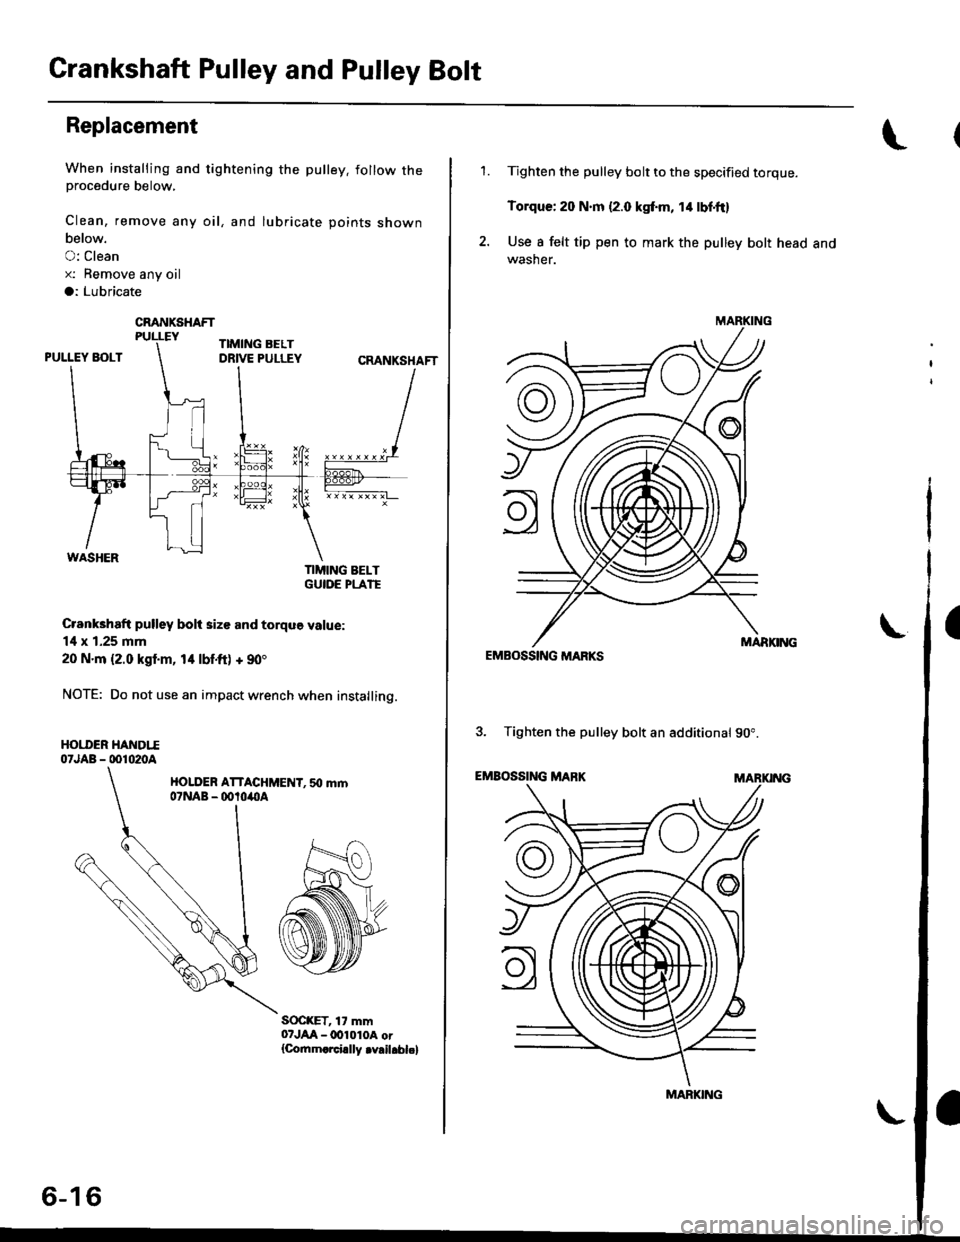 HONDA CIVIC 2000 6.G Workshop Manual Crankshaft Pulley and Pulley Bolt
Replacement
When installing and tightening the pulley. follow theprocedure below,
Clean, remove any oil, and lubricate points shown
below.
O: Clean
x: Bemove any oil
